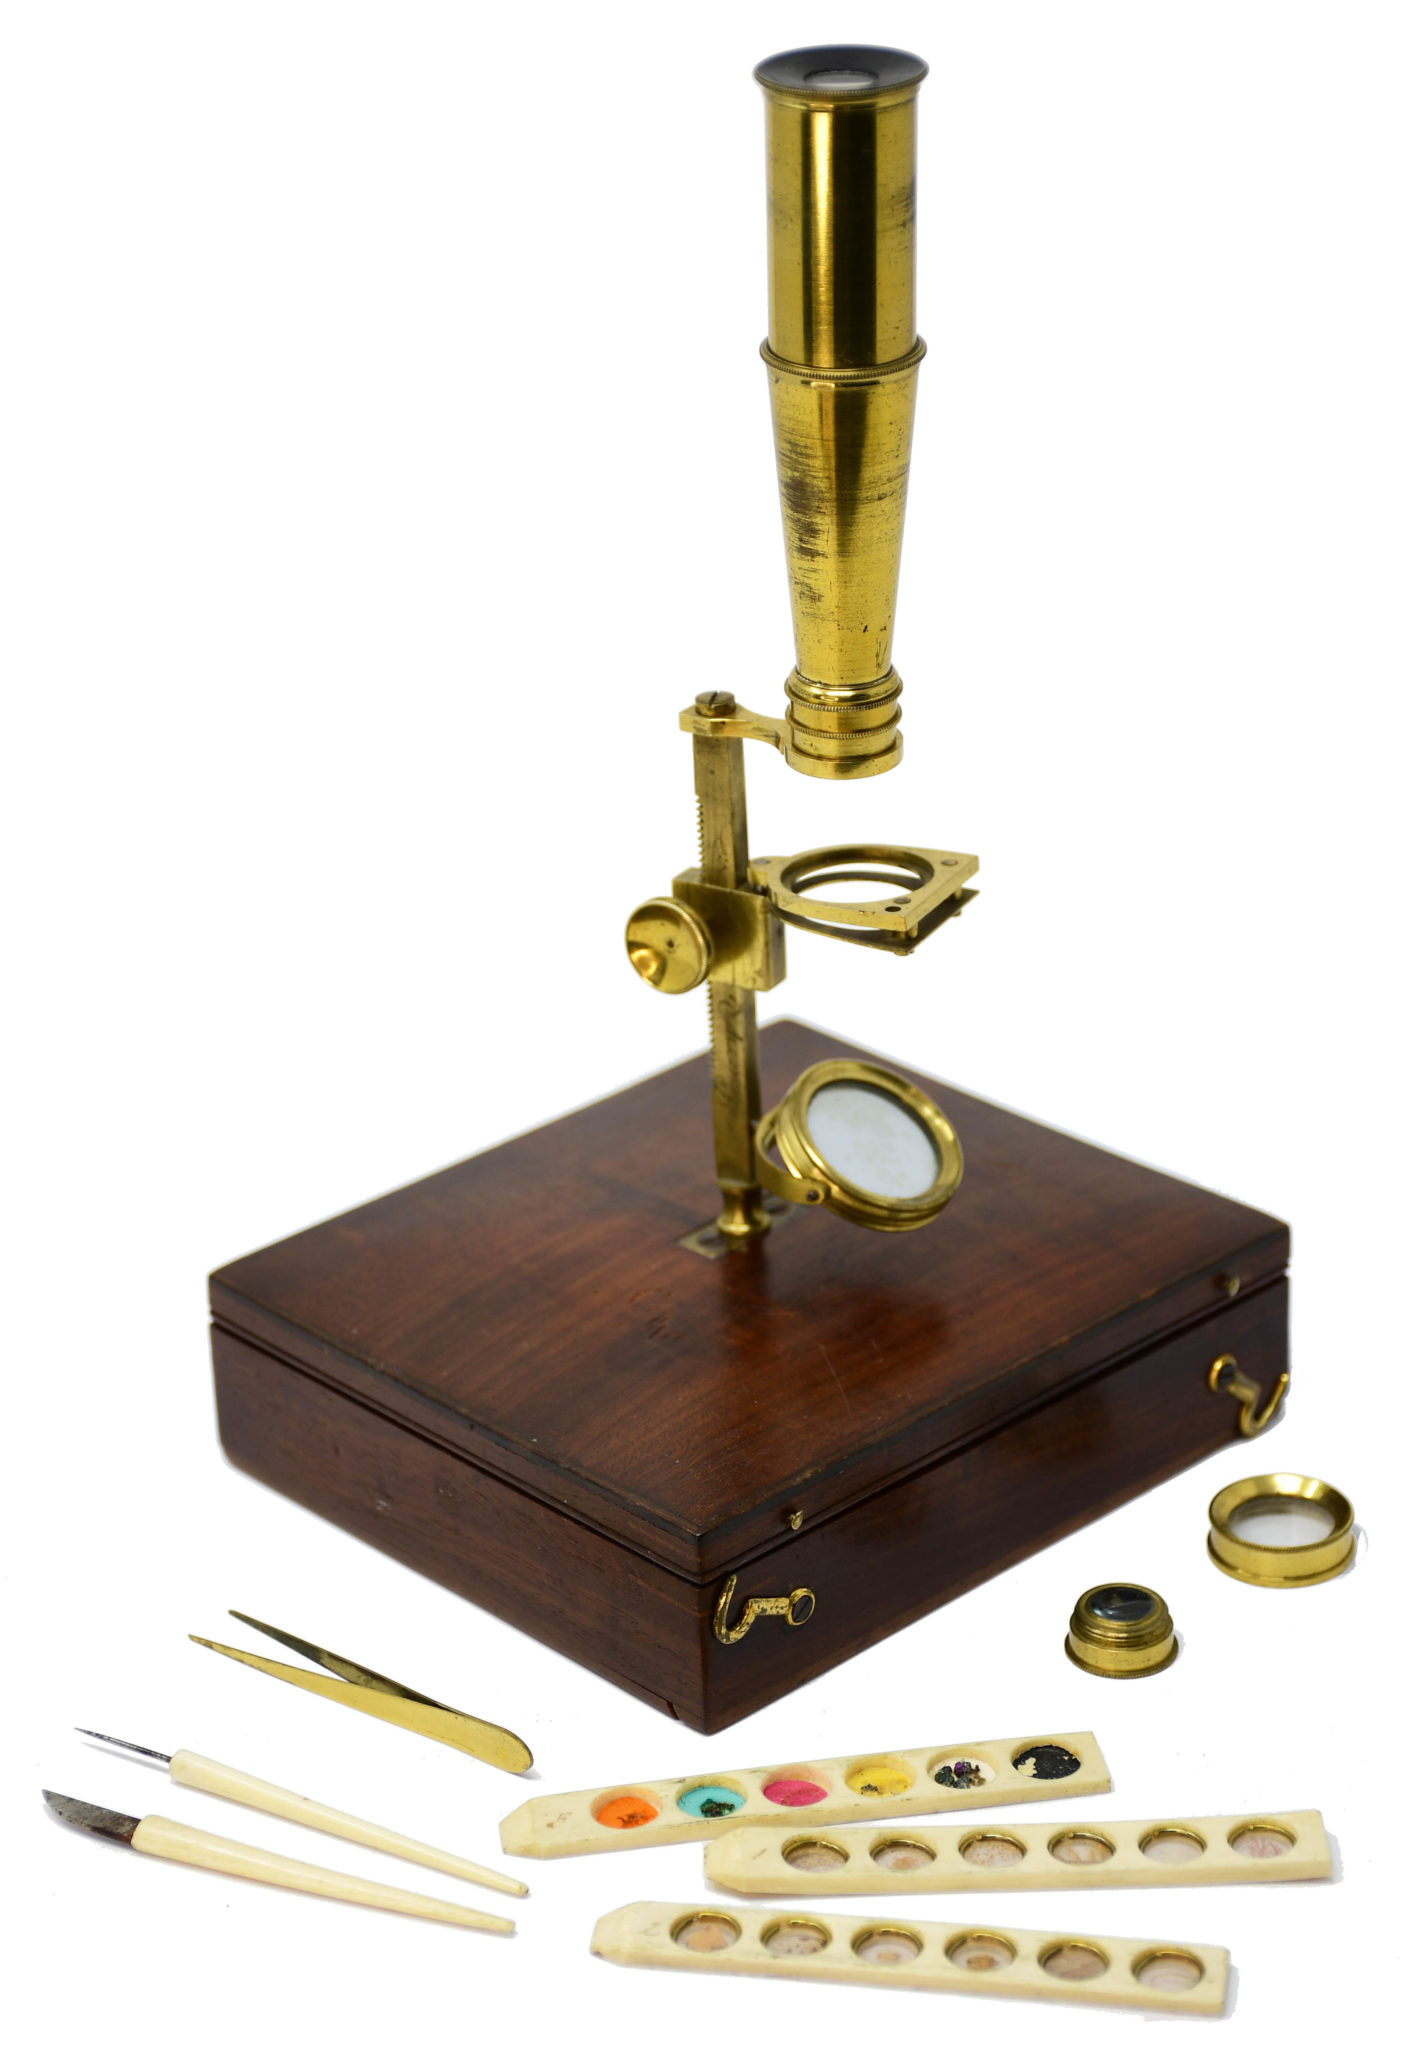 Gould type microscope by William Cary, ca. 1830